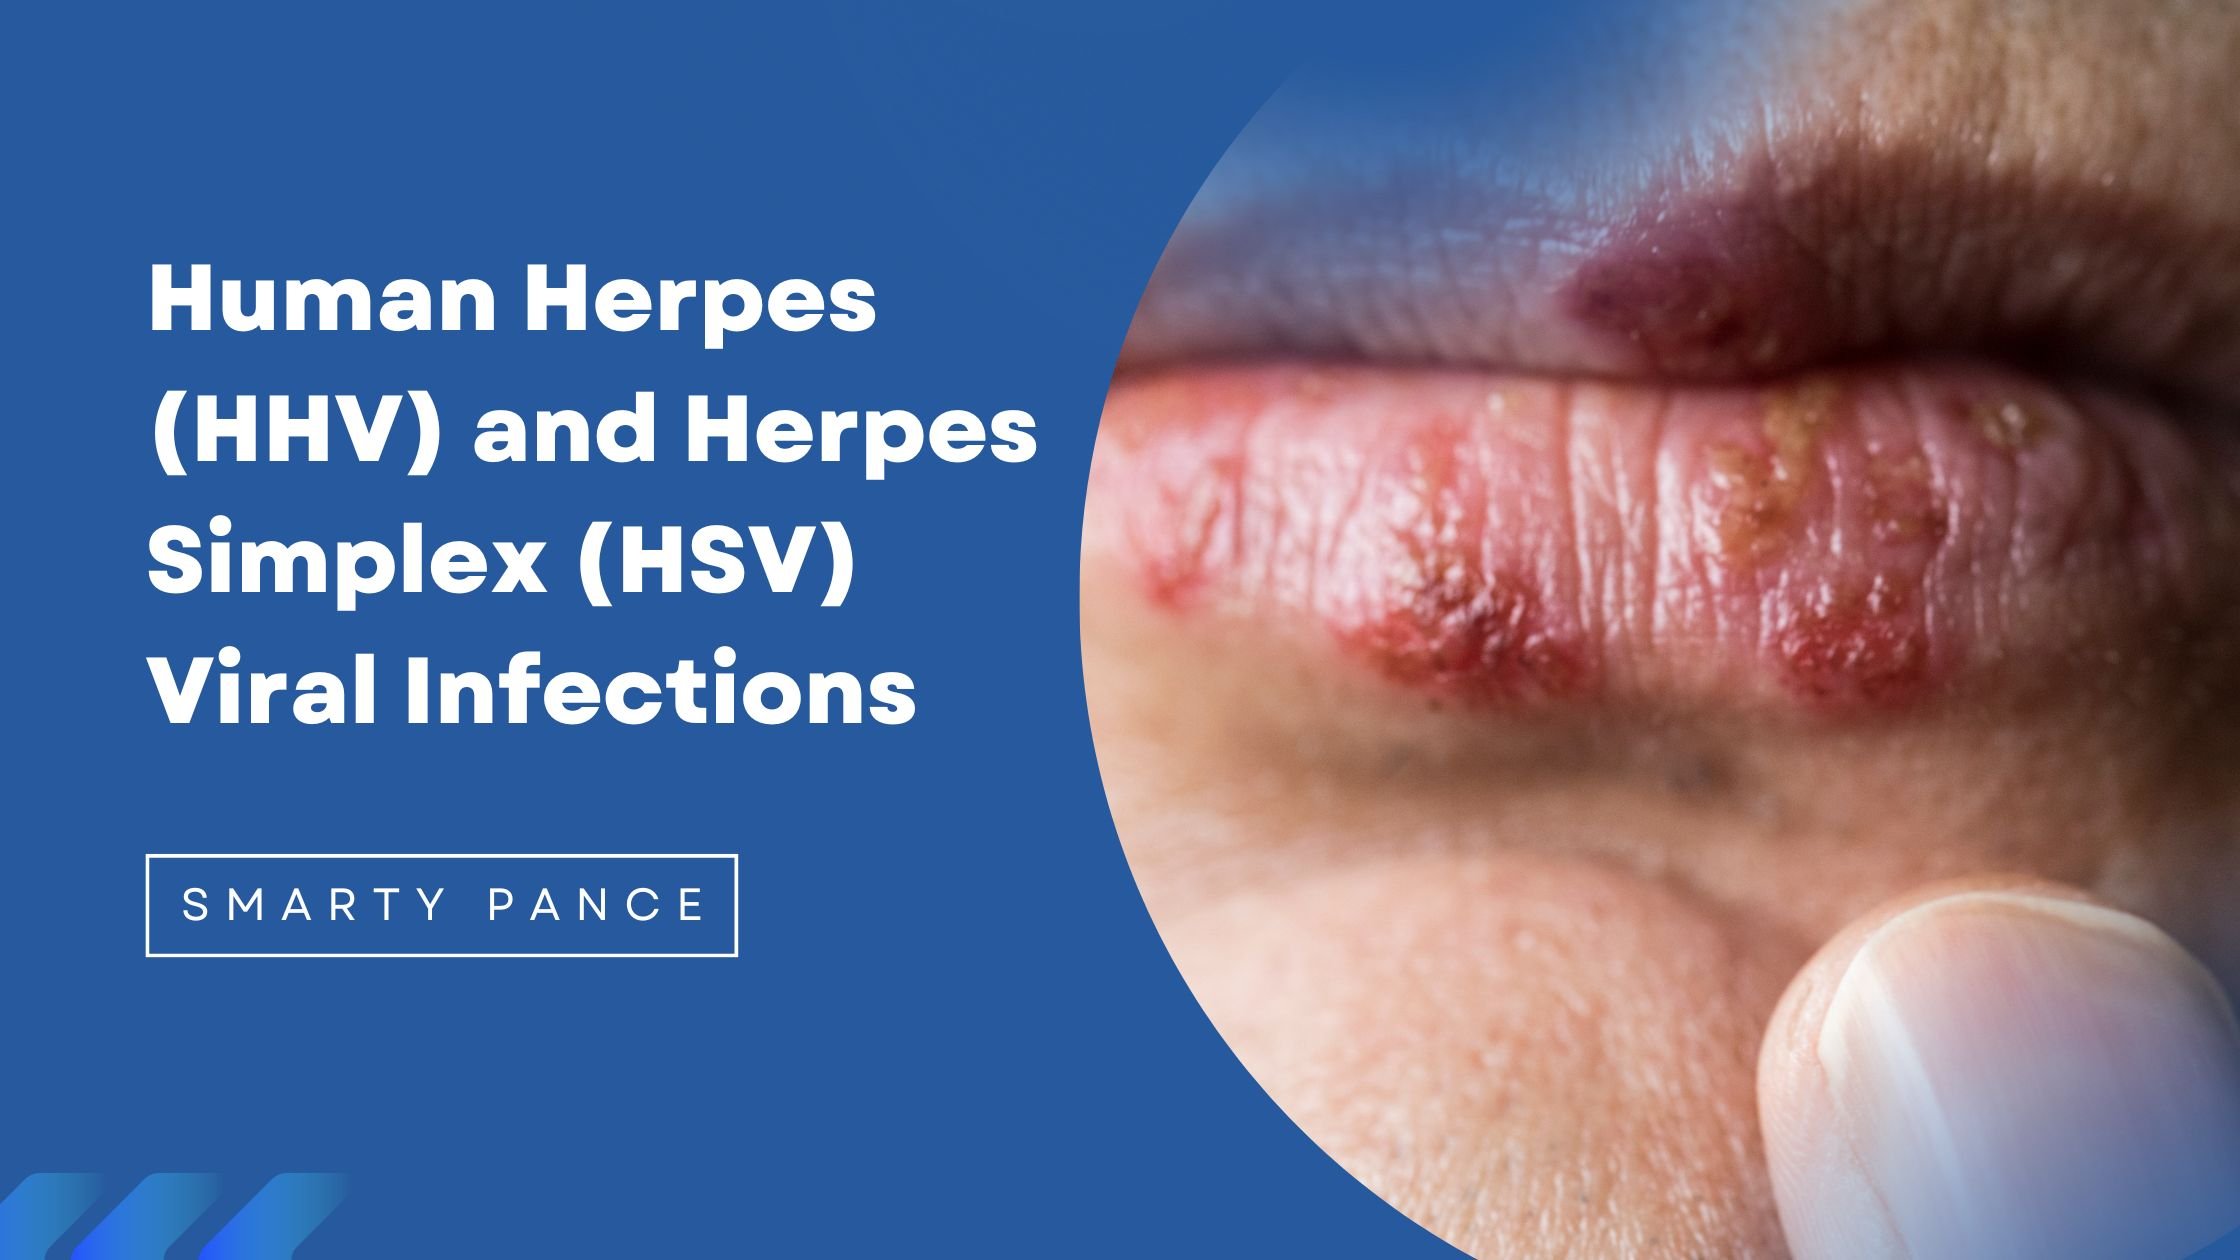 Human Herpes (HHV) and Herpes Simplex (HSV) Viral Infections